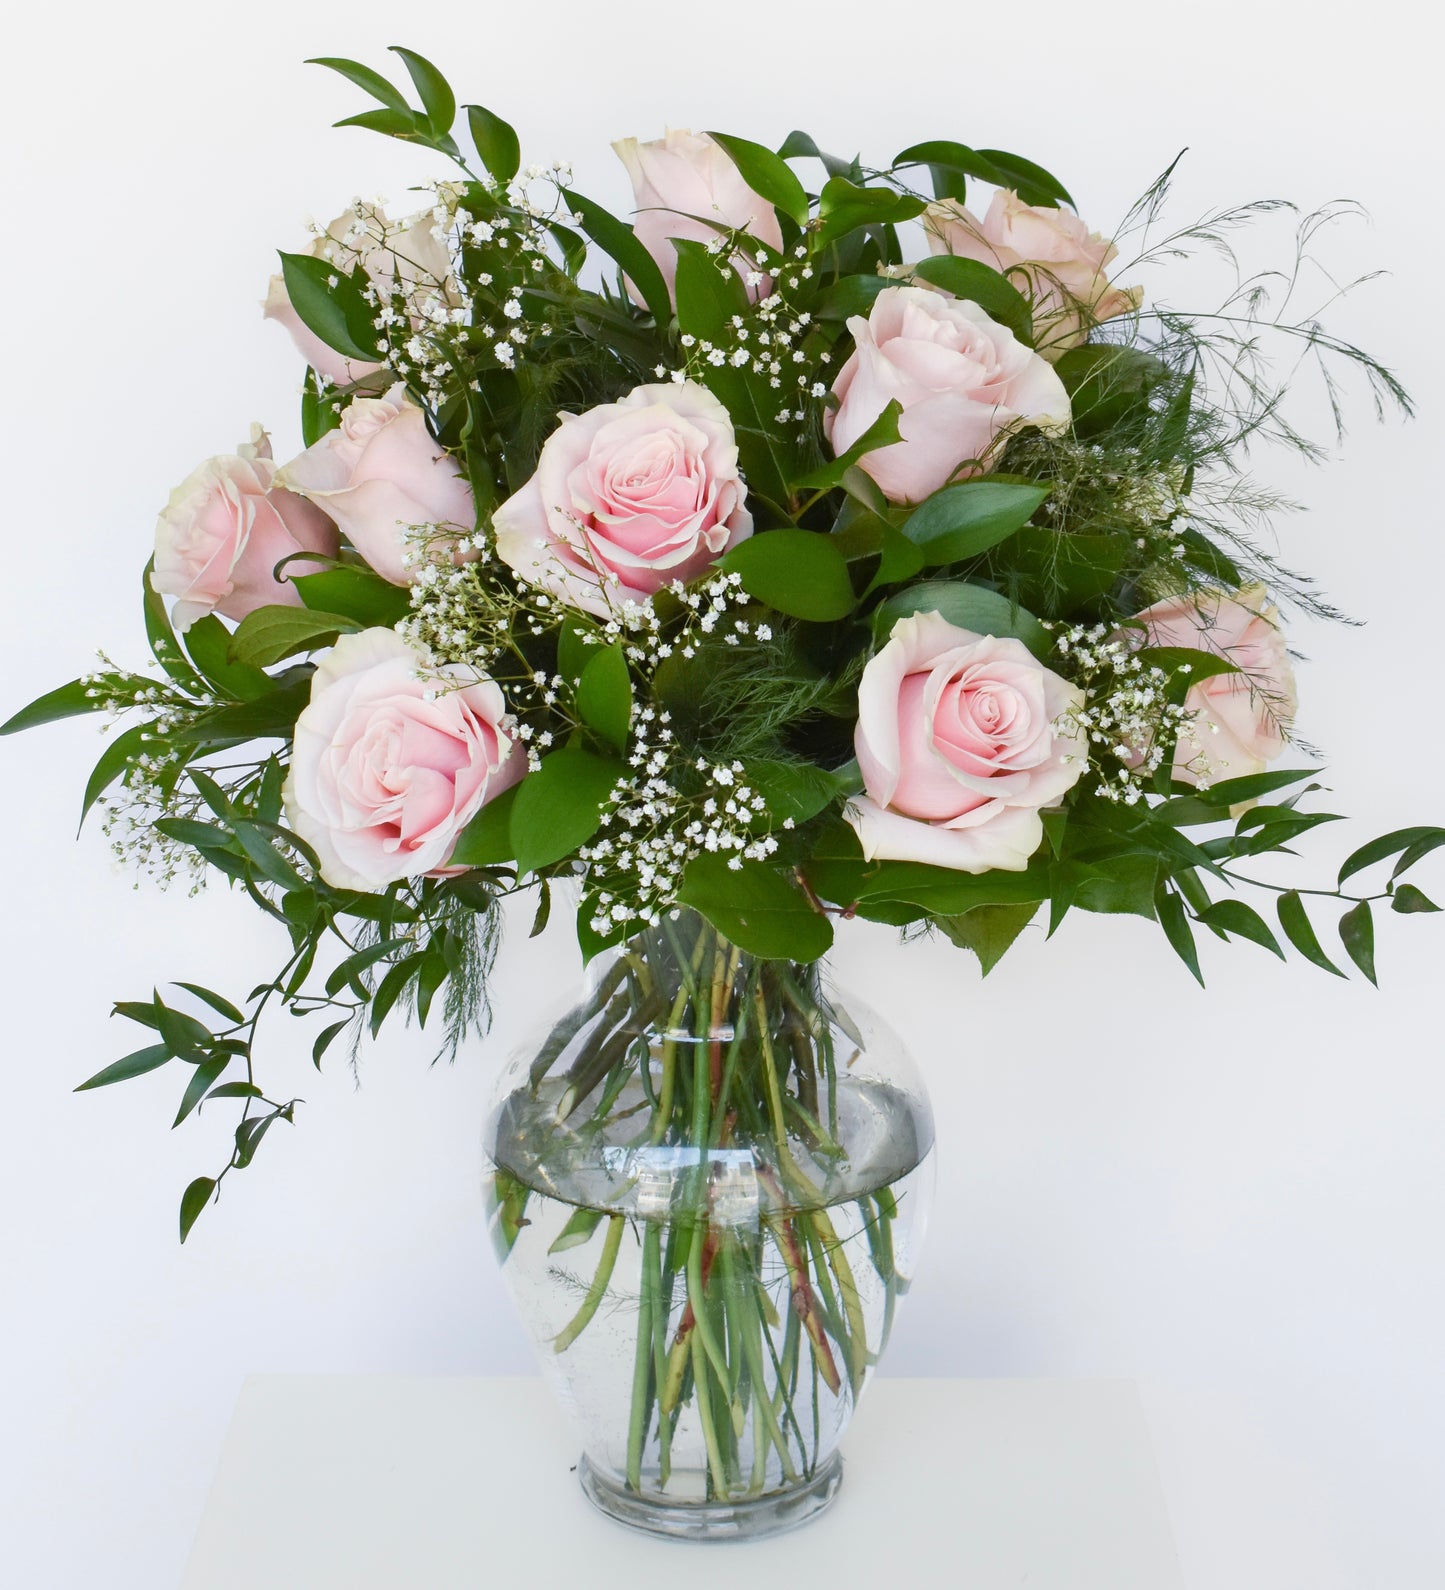 Valentine's Day Pink Roses